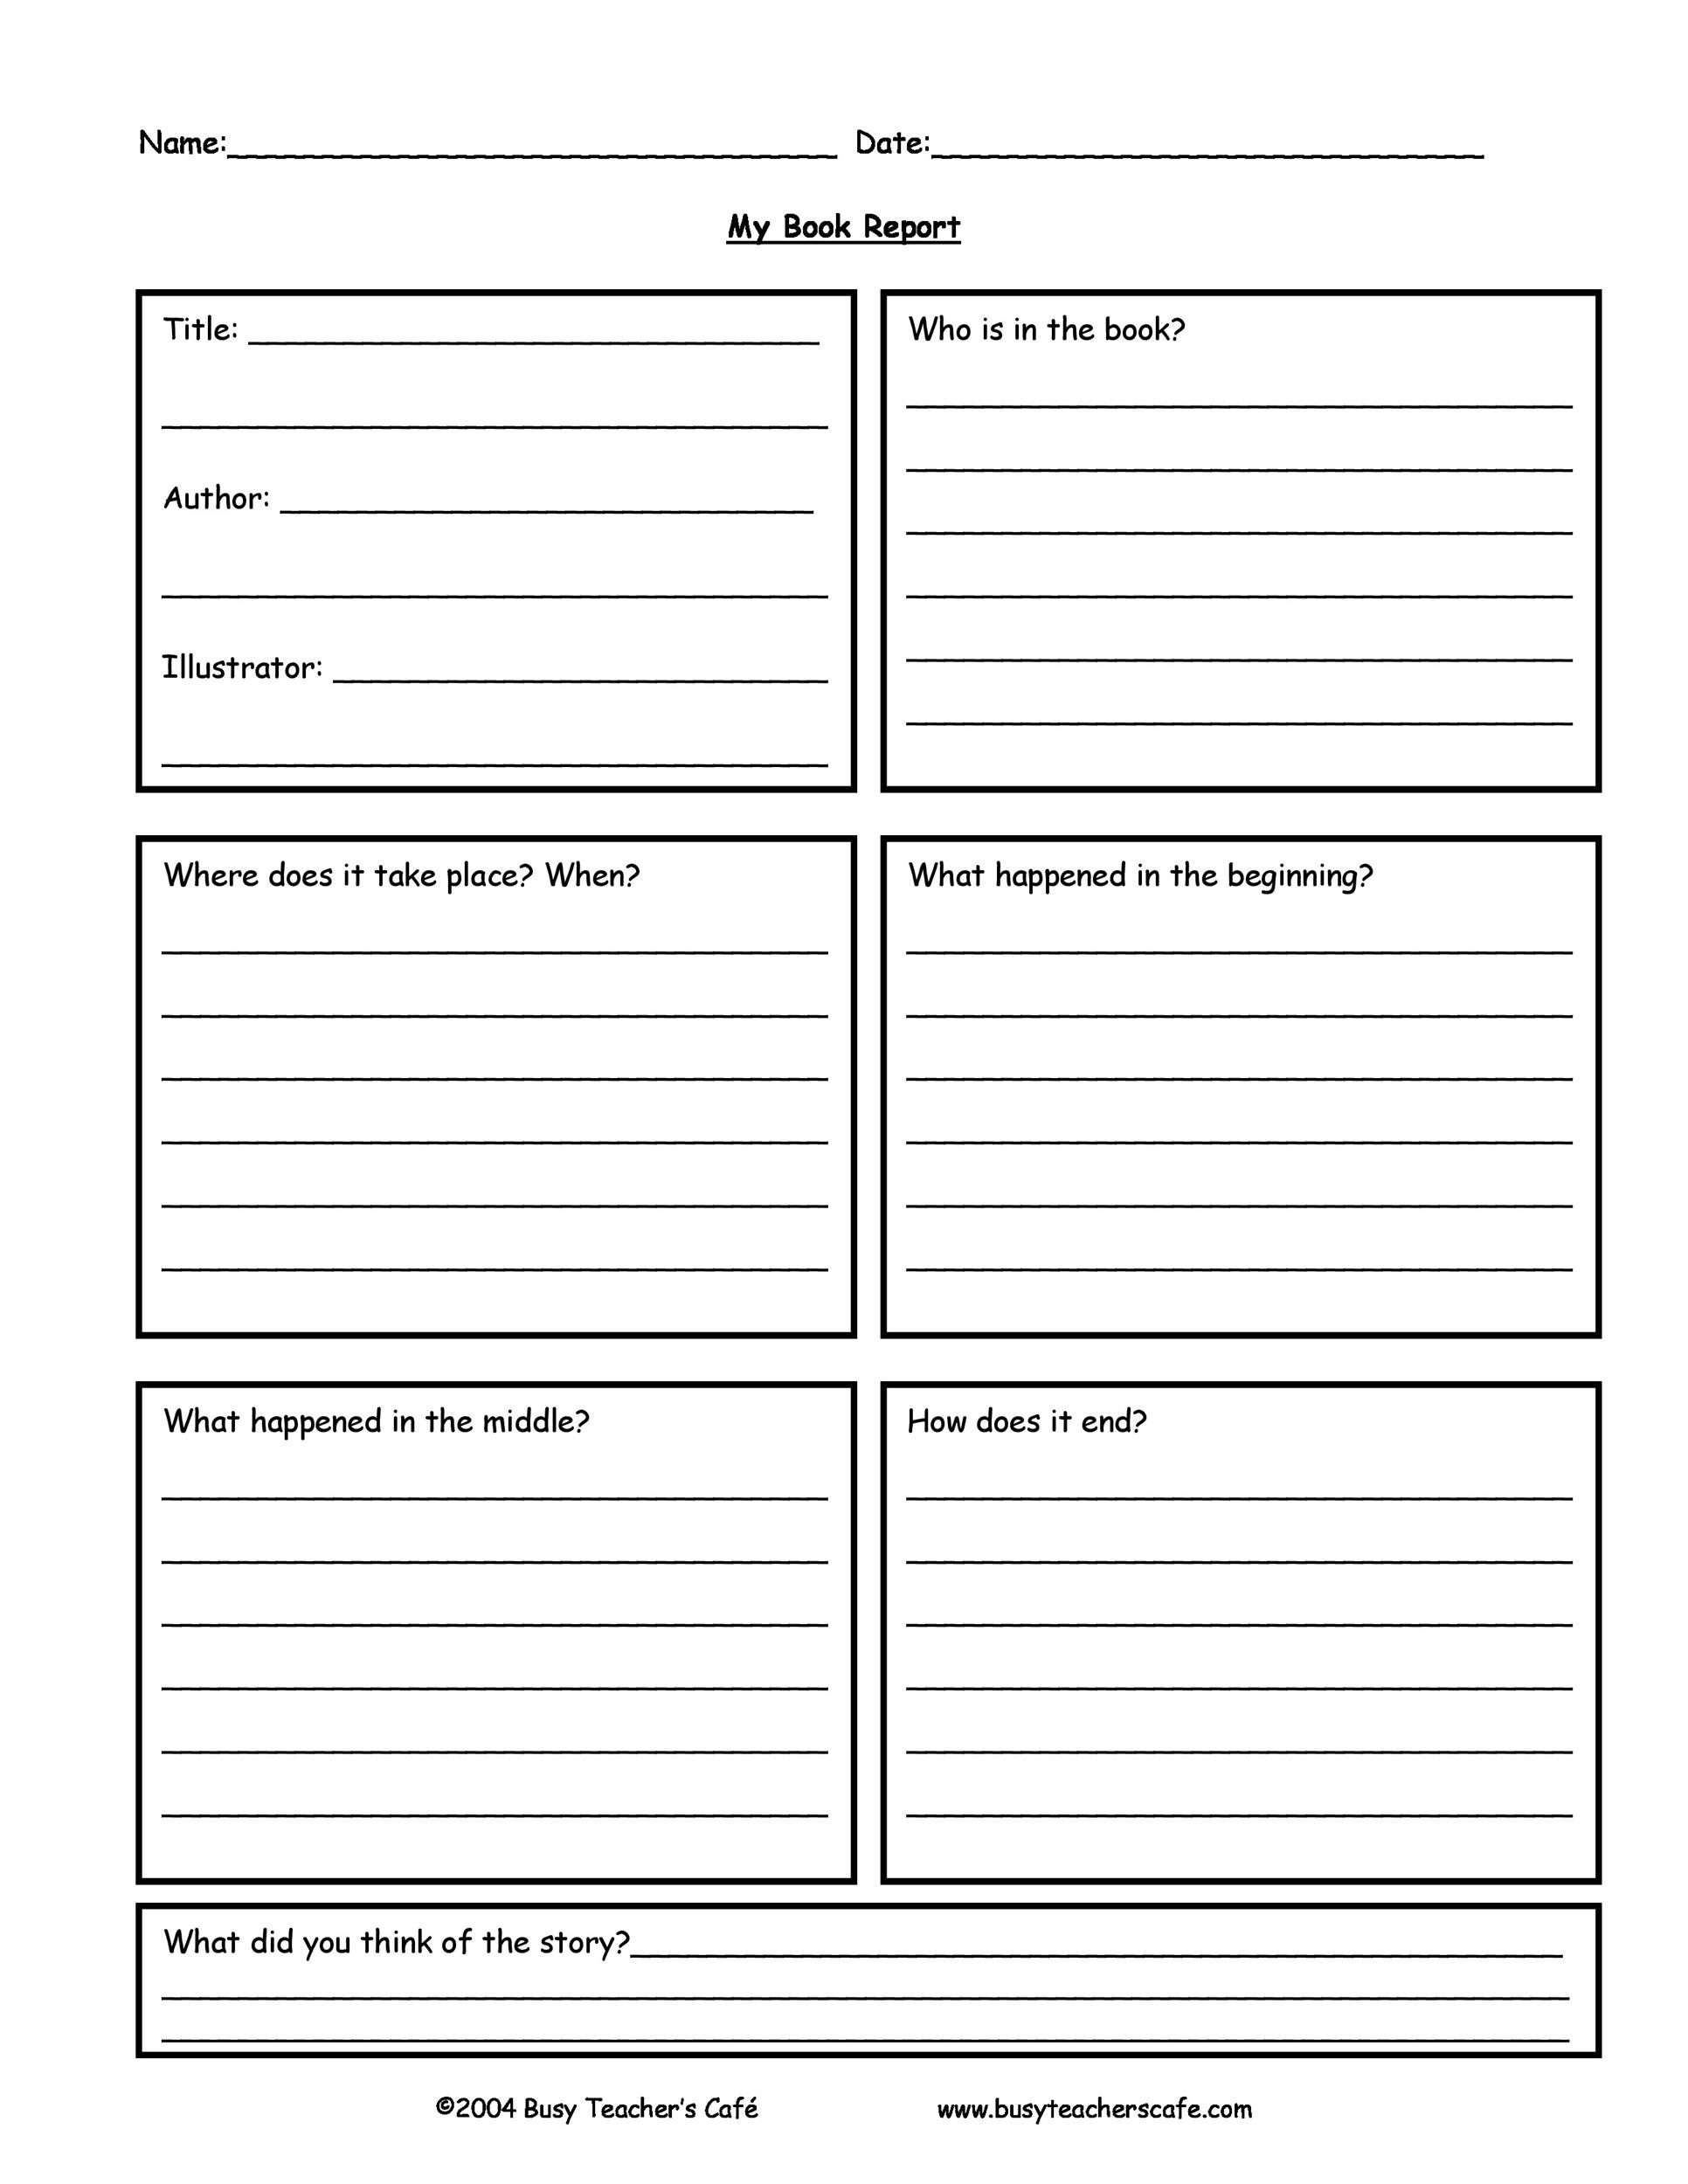 Free Book Report Template 28